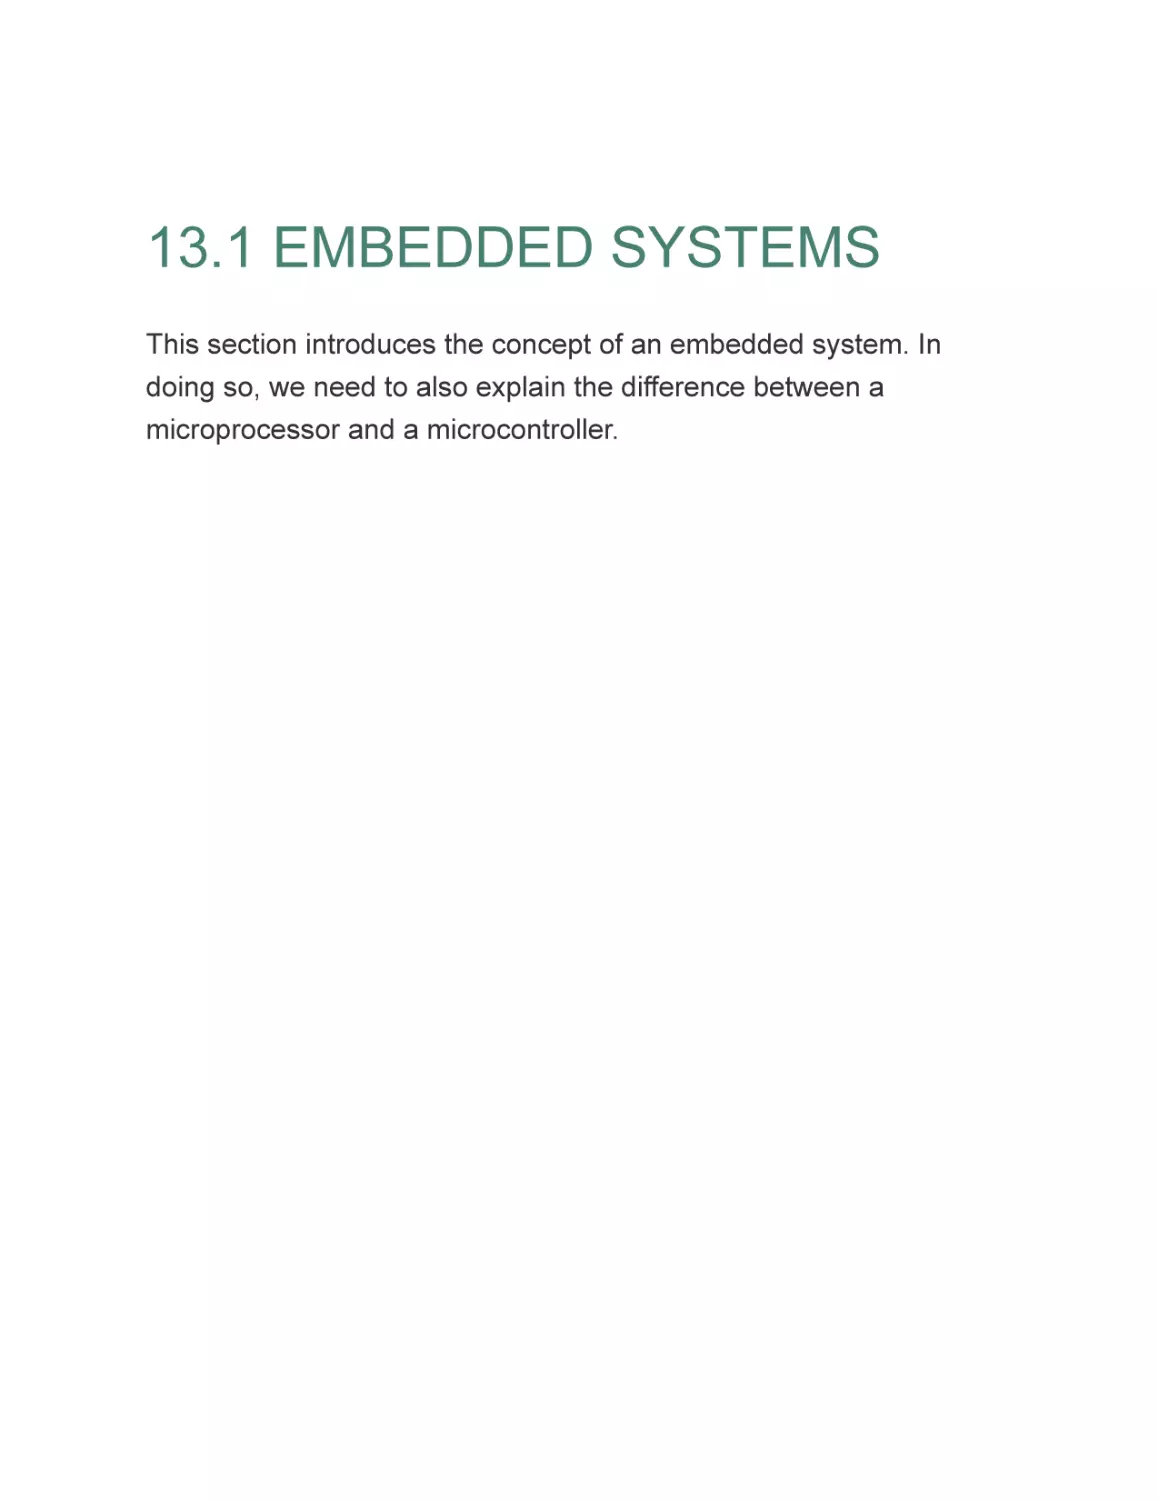 13.1 EMBEDDED SYSTEMS